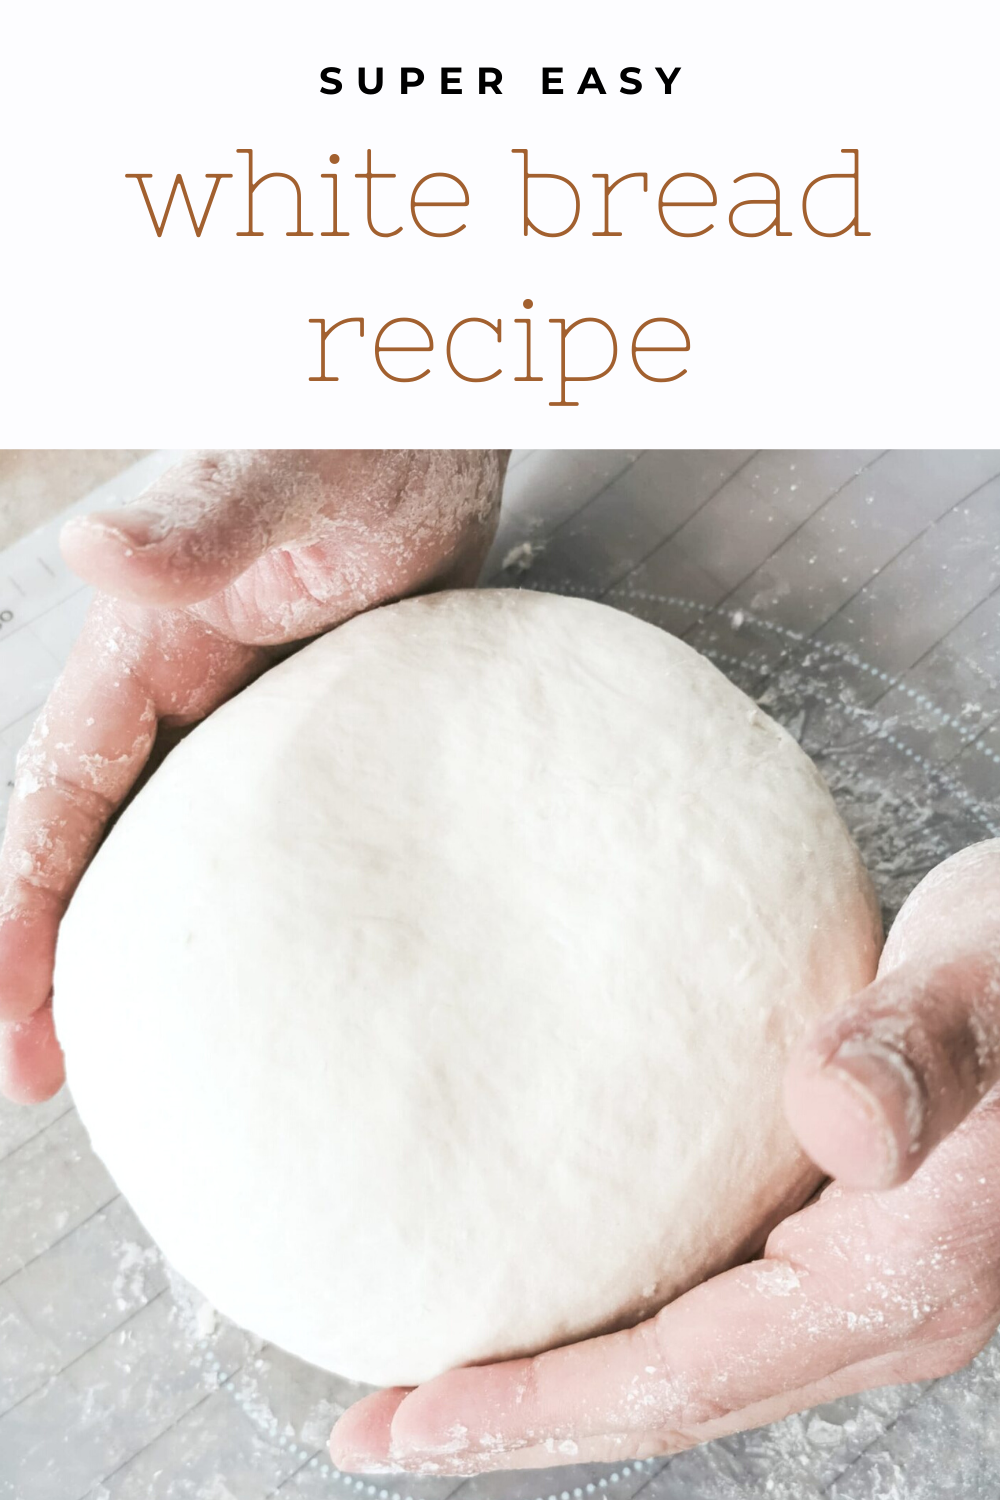 A banner reads, "Super Easy White Bread Recipe," a picture of hands kneading a dough ball is shown.